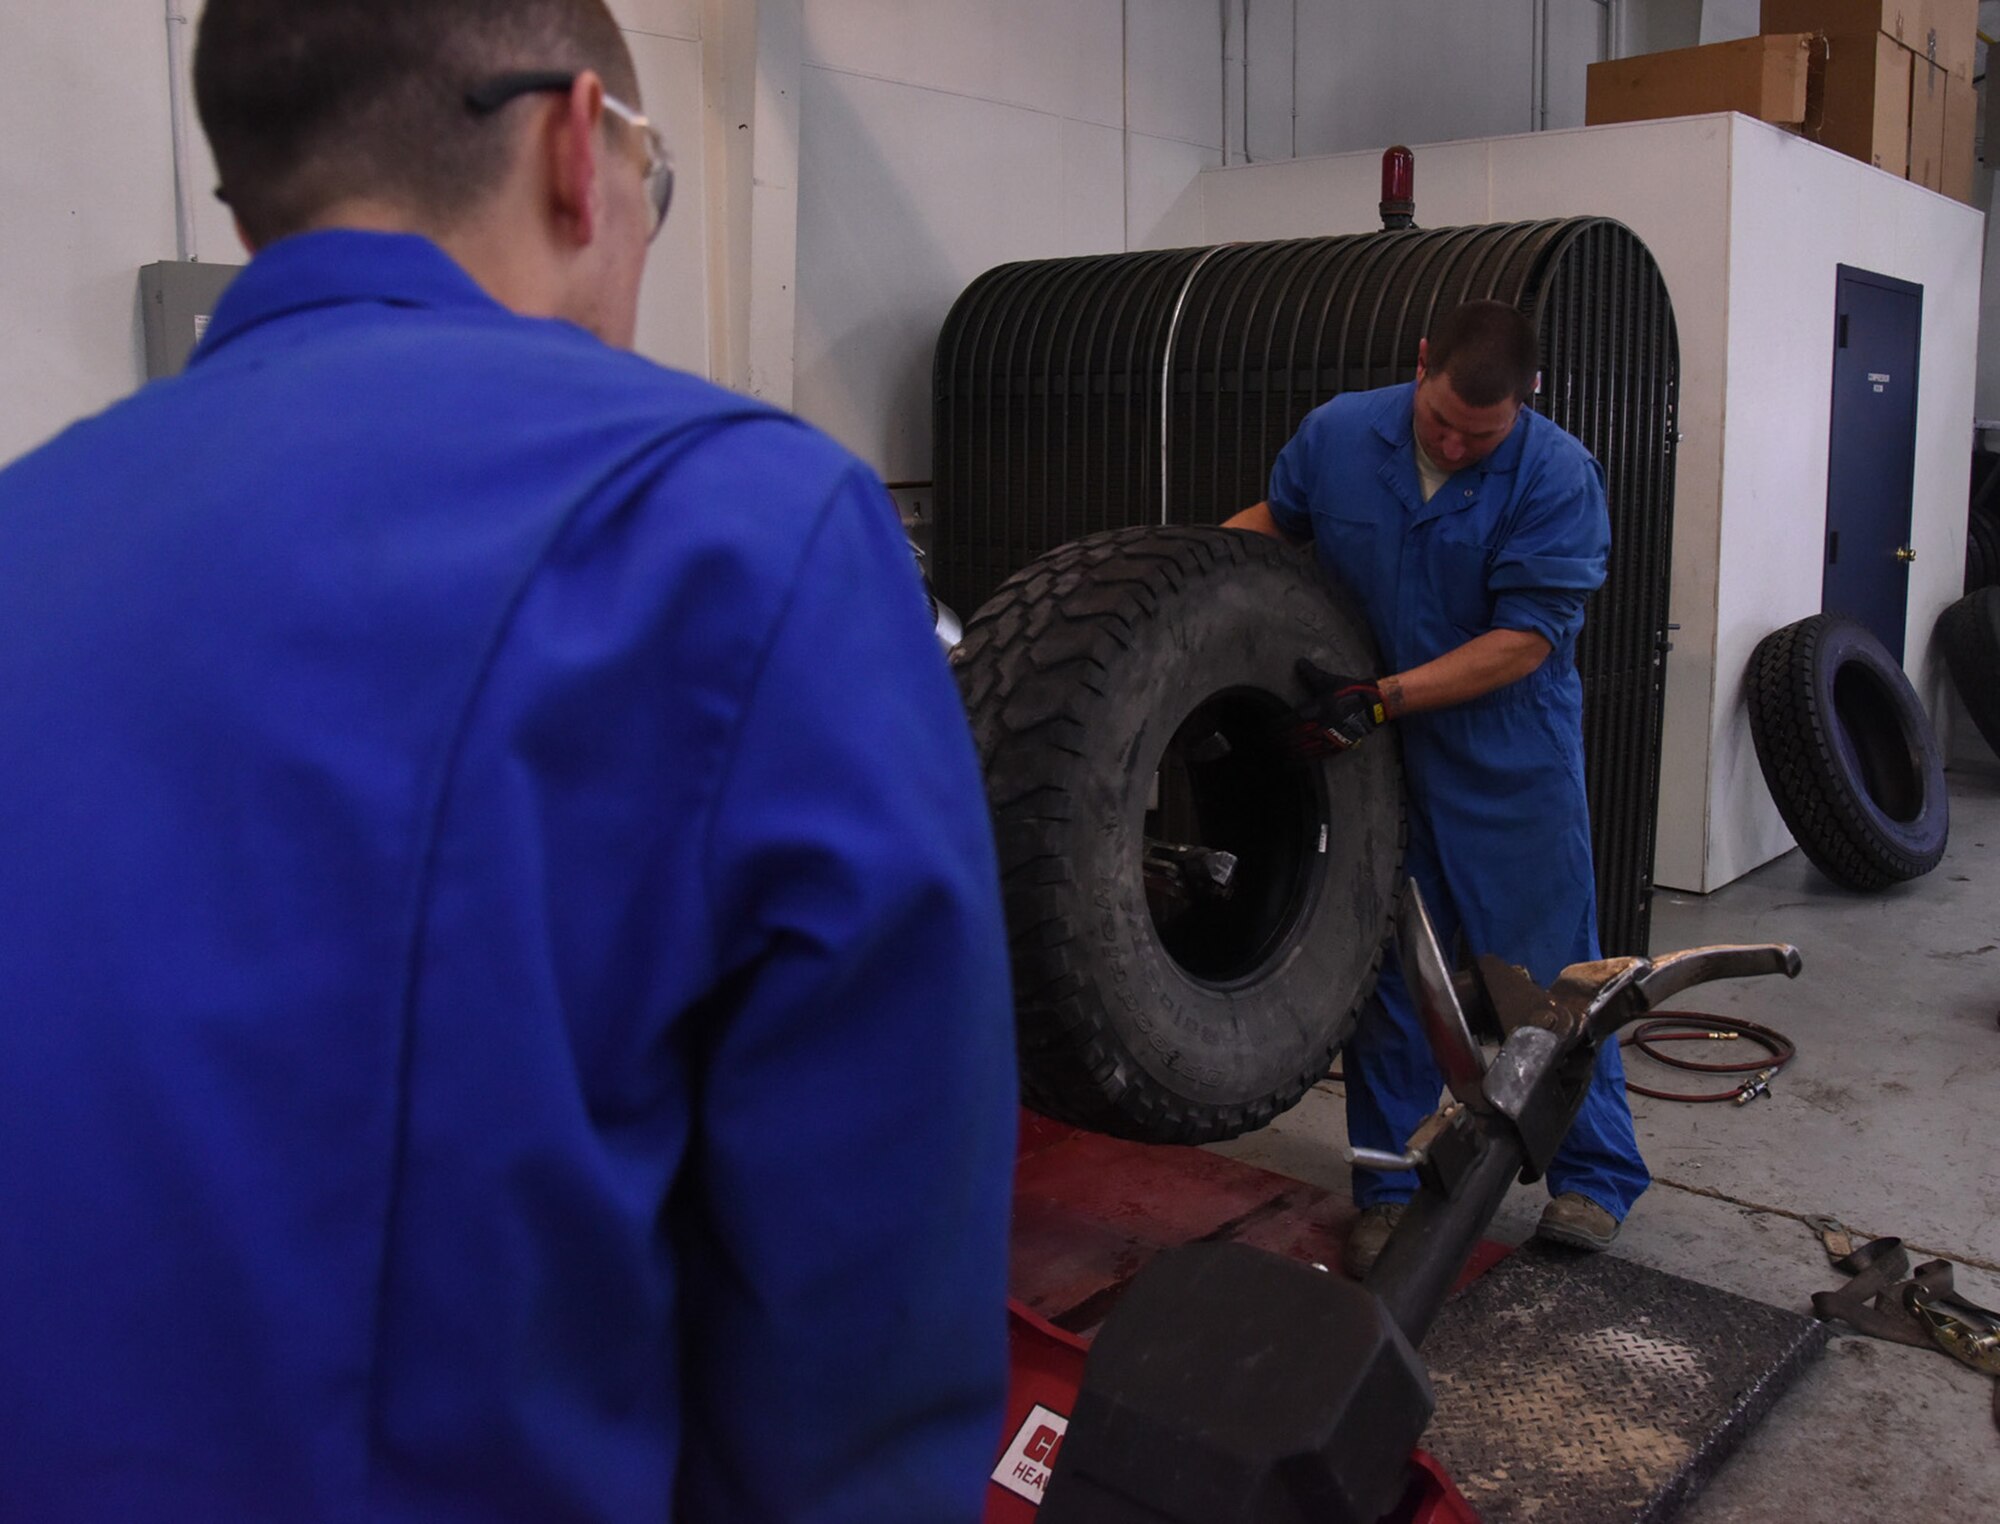 Airman 1st Class Johnathan Allen, left, 341st Logistics Readiness Squadron vehicle maintenance apprentice, and Technical Sgt. Gregory Cornelison, right, NCO in charge of mobile maintenance, pull a tire off a large tire machine at the LRS tire shop Nov. 29, 2016, at Malmstrom Air Force Base, Mont. Damaged tires are rolled to the back onto a trailer to take to disposition. (U.S. Air Force photo/Senior Airman Jaeda Tookes)